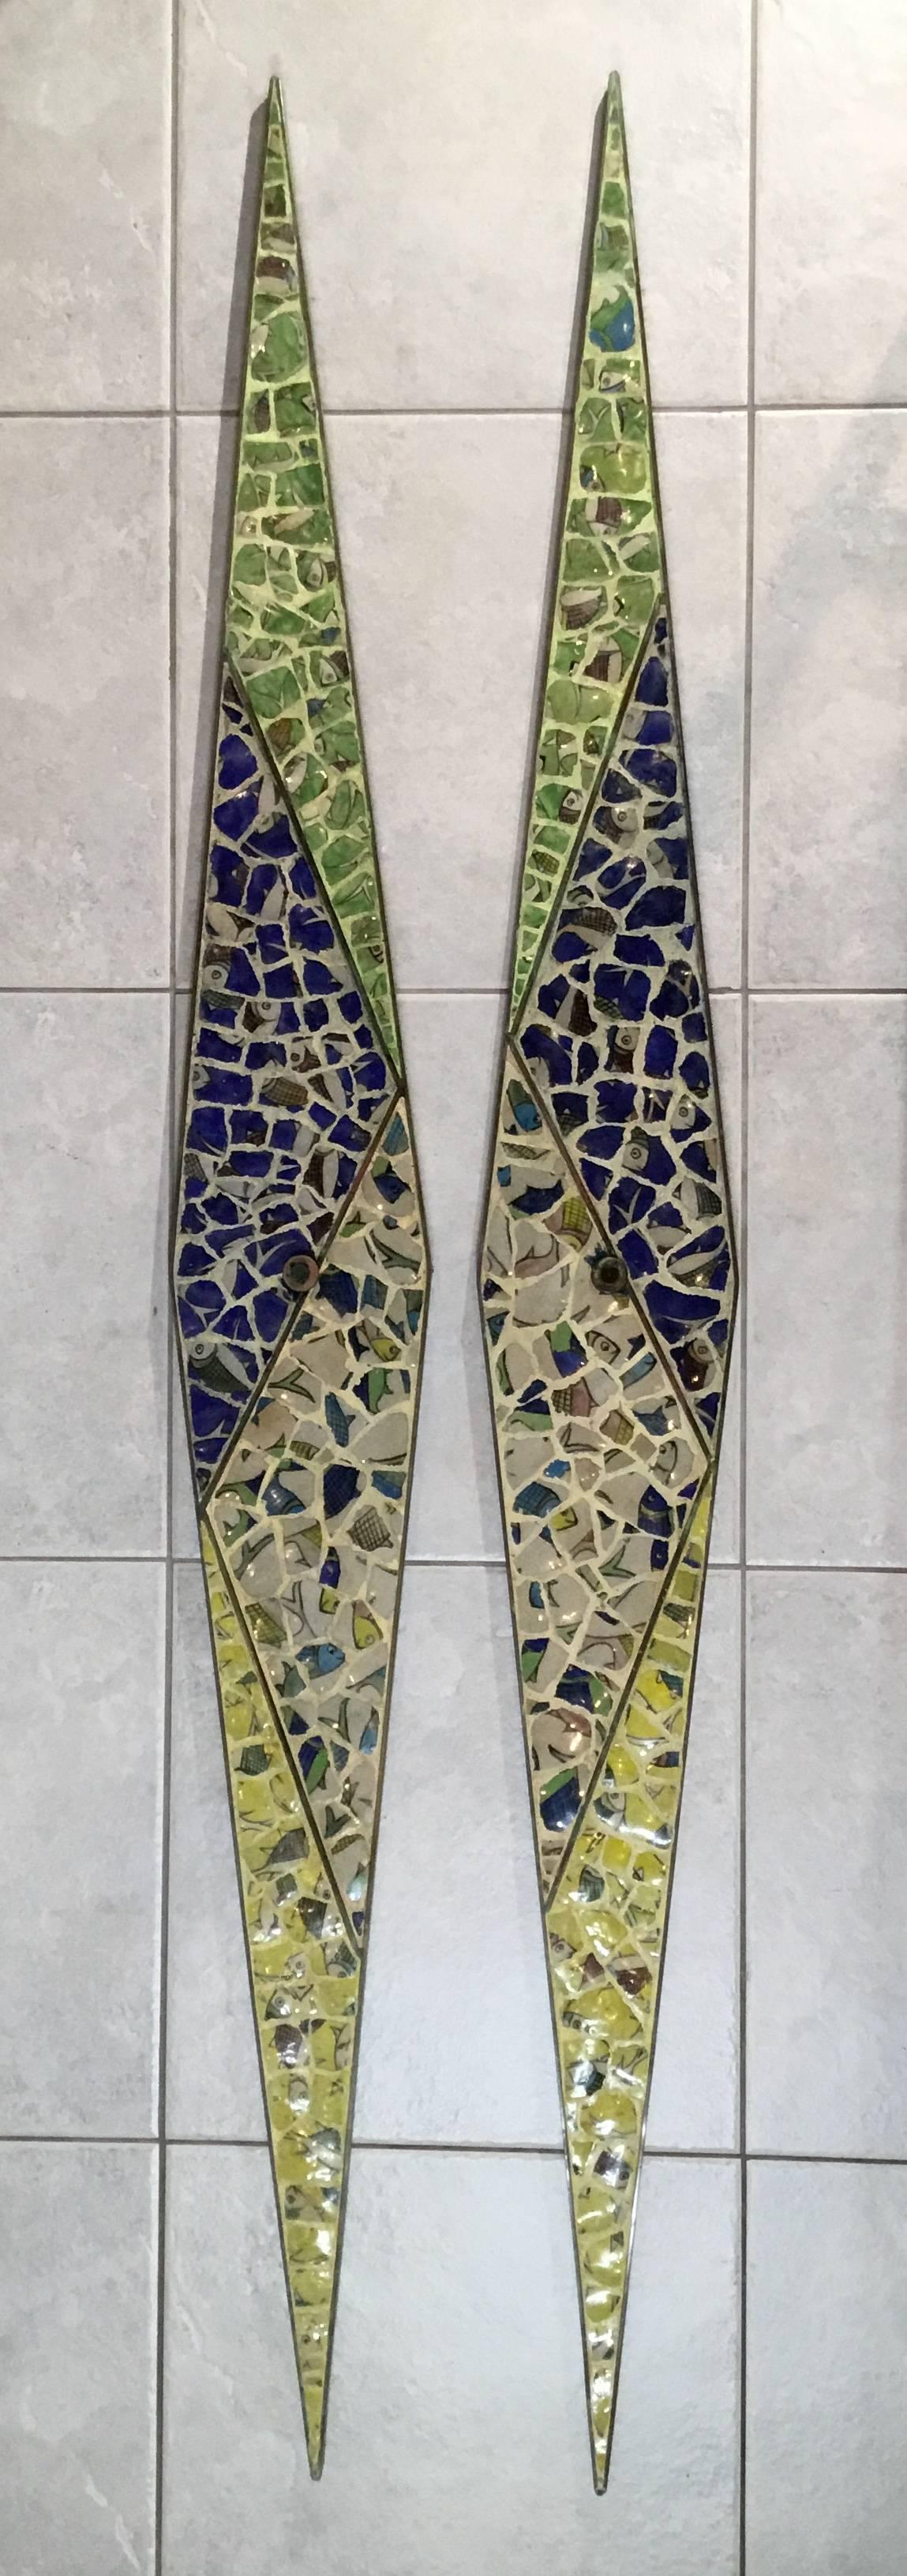 Large Pair of Artistic Brass Wall Hanging Sconces By Joseph Malekan In Good Condition For Sale In Delray Beach, FL